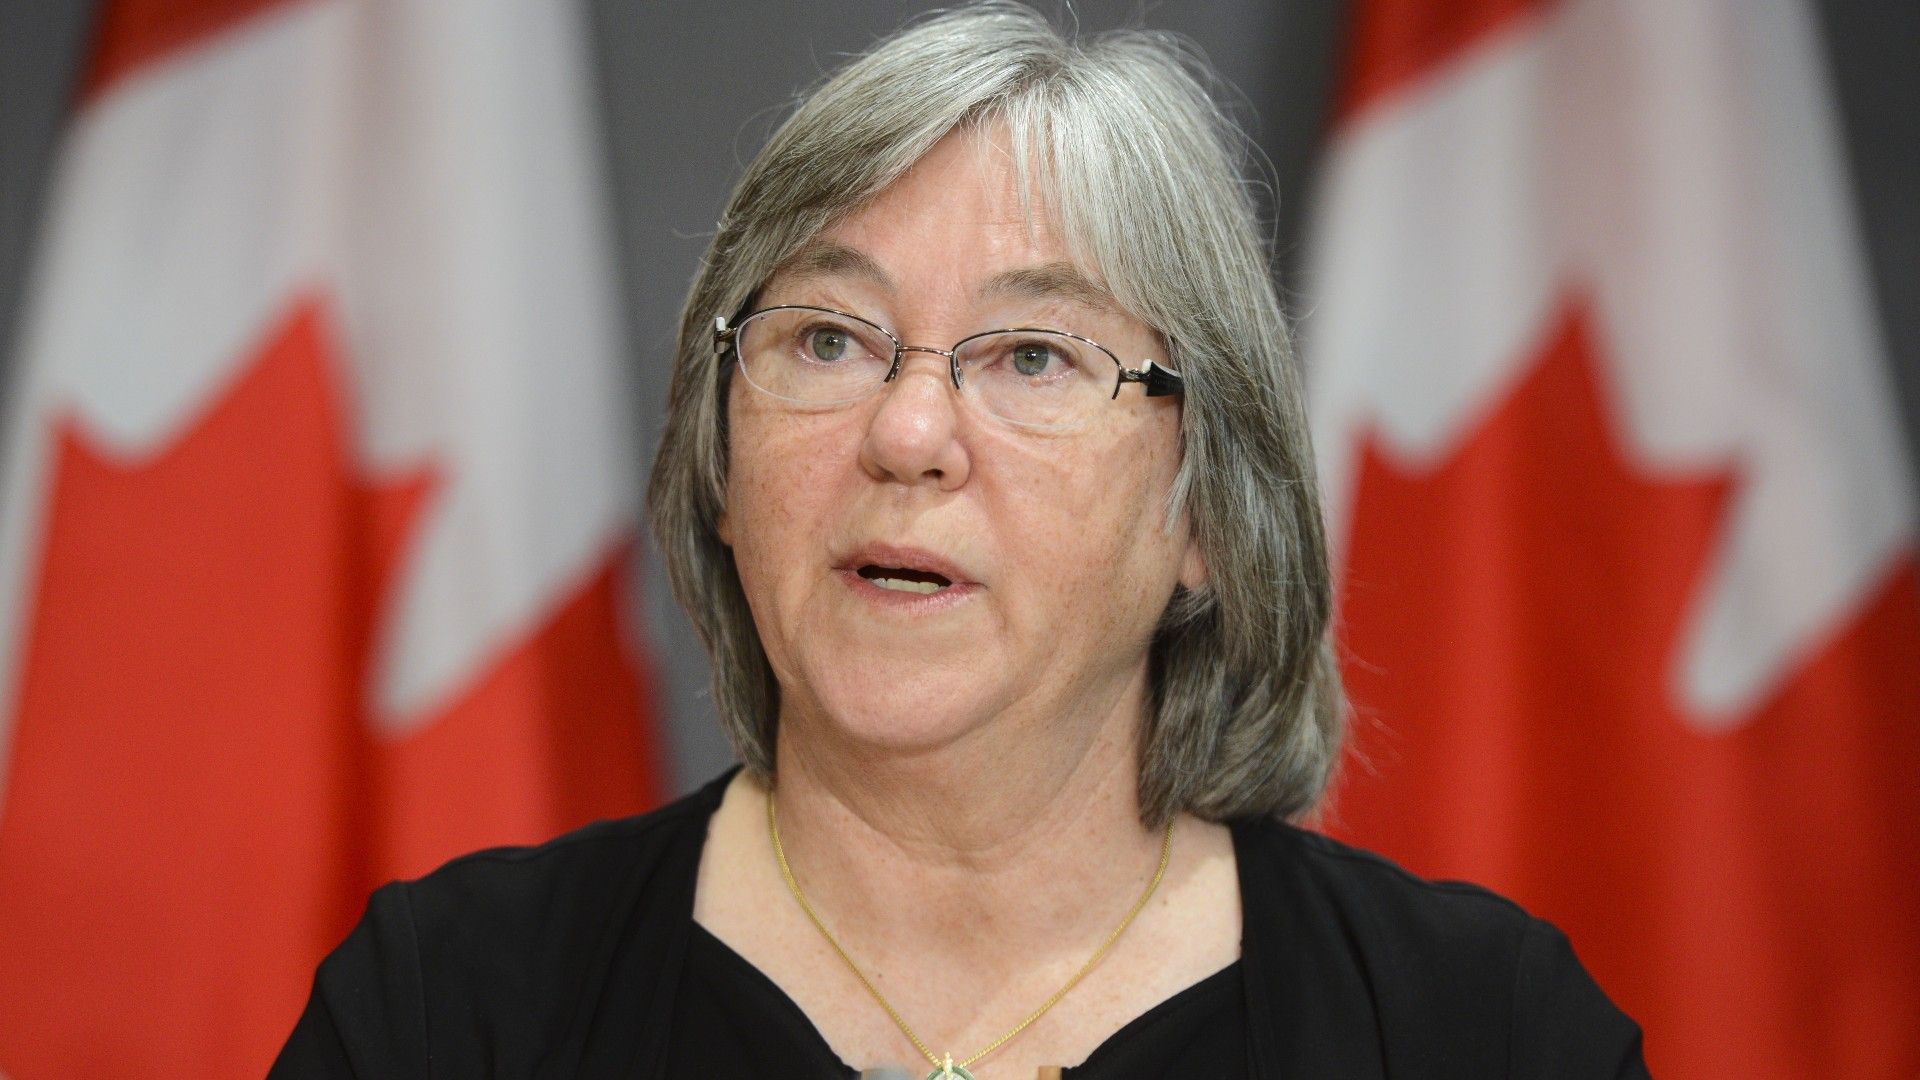 Deb Schulte, former Minister of Seniors, speaks during a press conference in 2020. (Sean Kilpatrick / The Canadian Press)